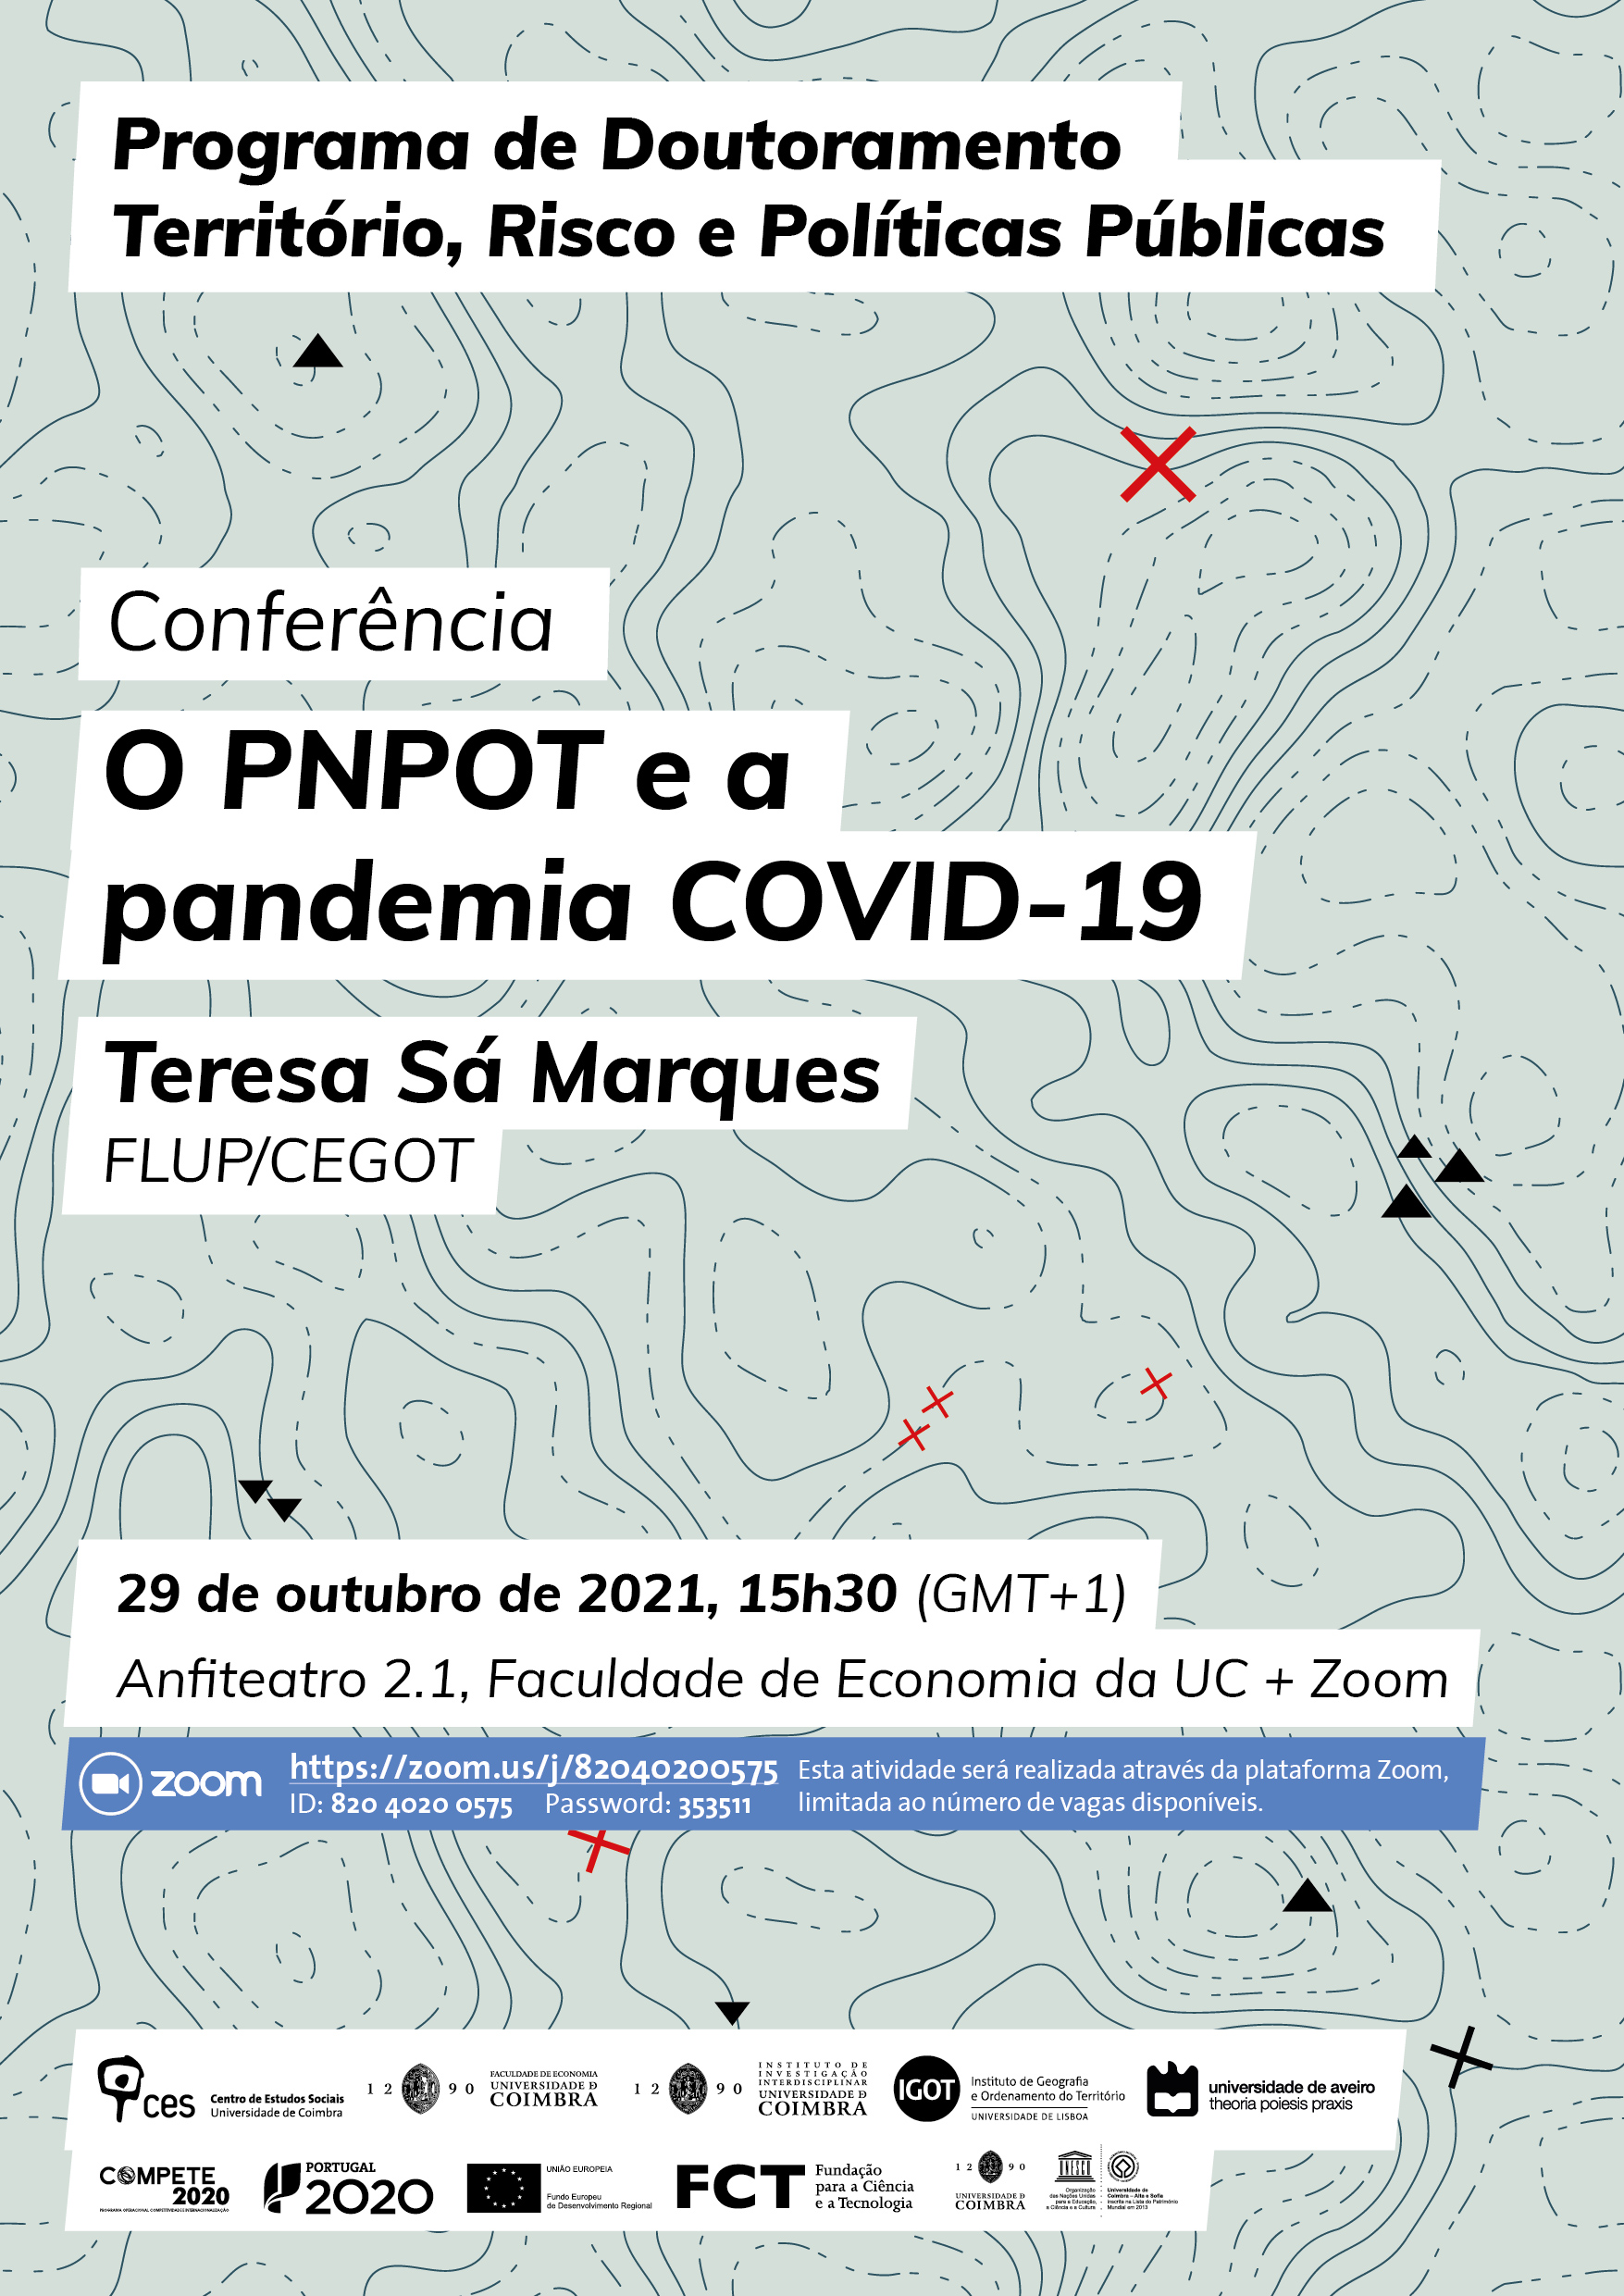 The National Programme for Territorial Planning Policy (PNPOT) and the COVID-19 Pandemic<span id="edit_35914"><script>$(function() { $('#edit_35914').load( "/myces/user/editobj.php?tipo=evento&id=35914" ); });</script></span>